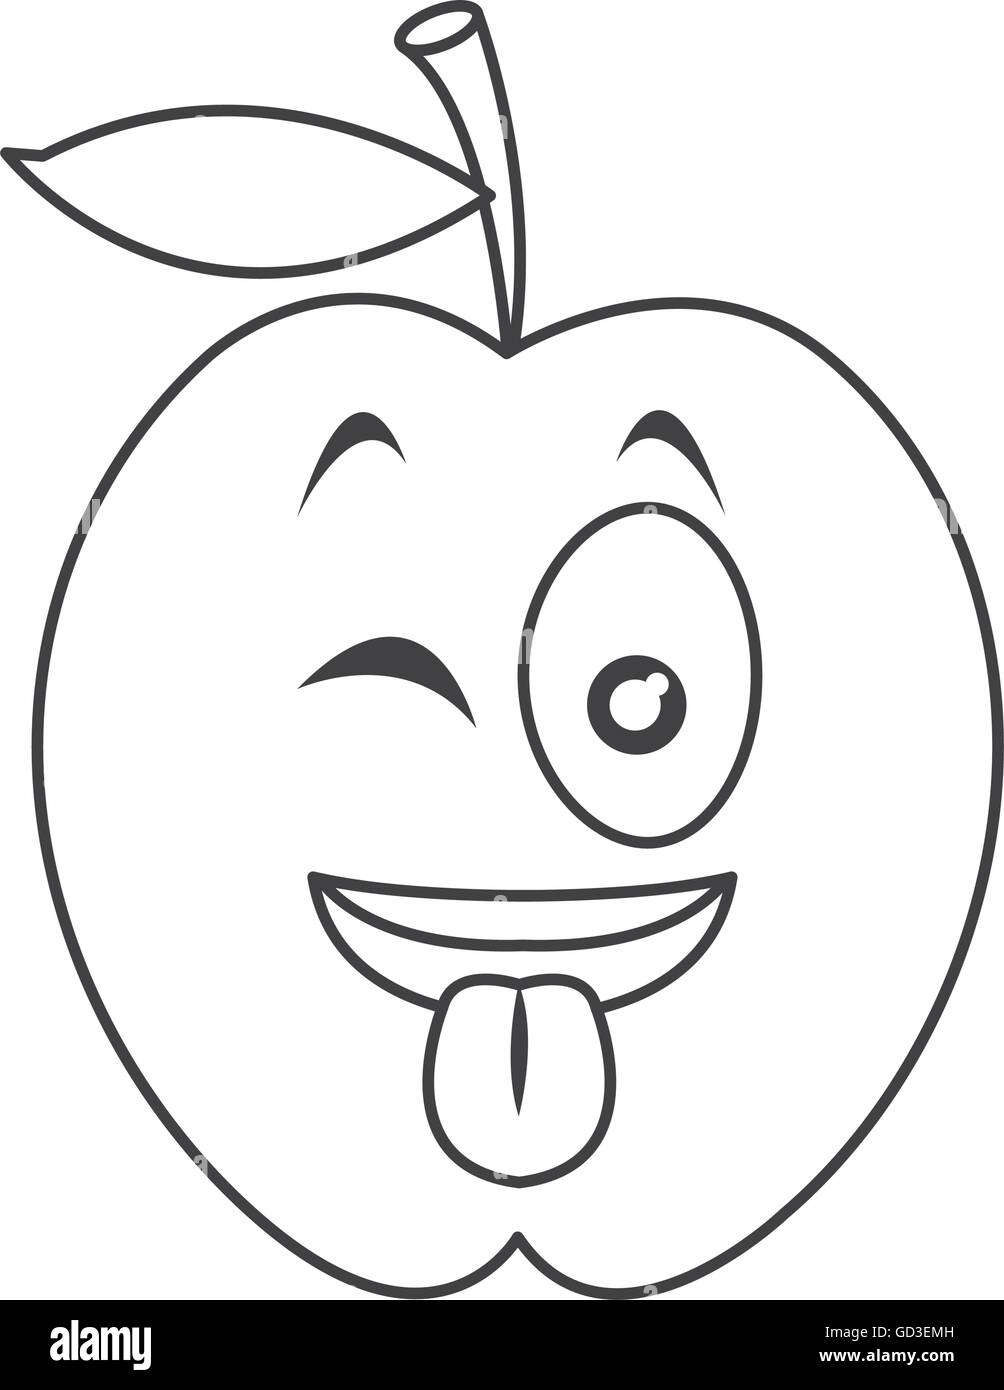 wink tongue out apple cartoon icon Stock Vector